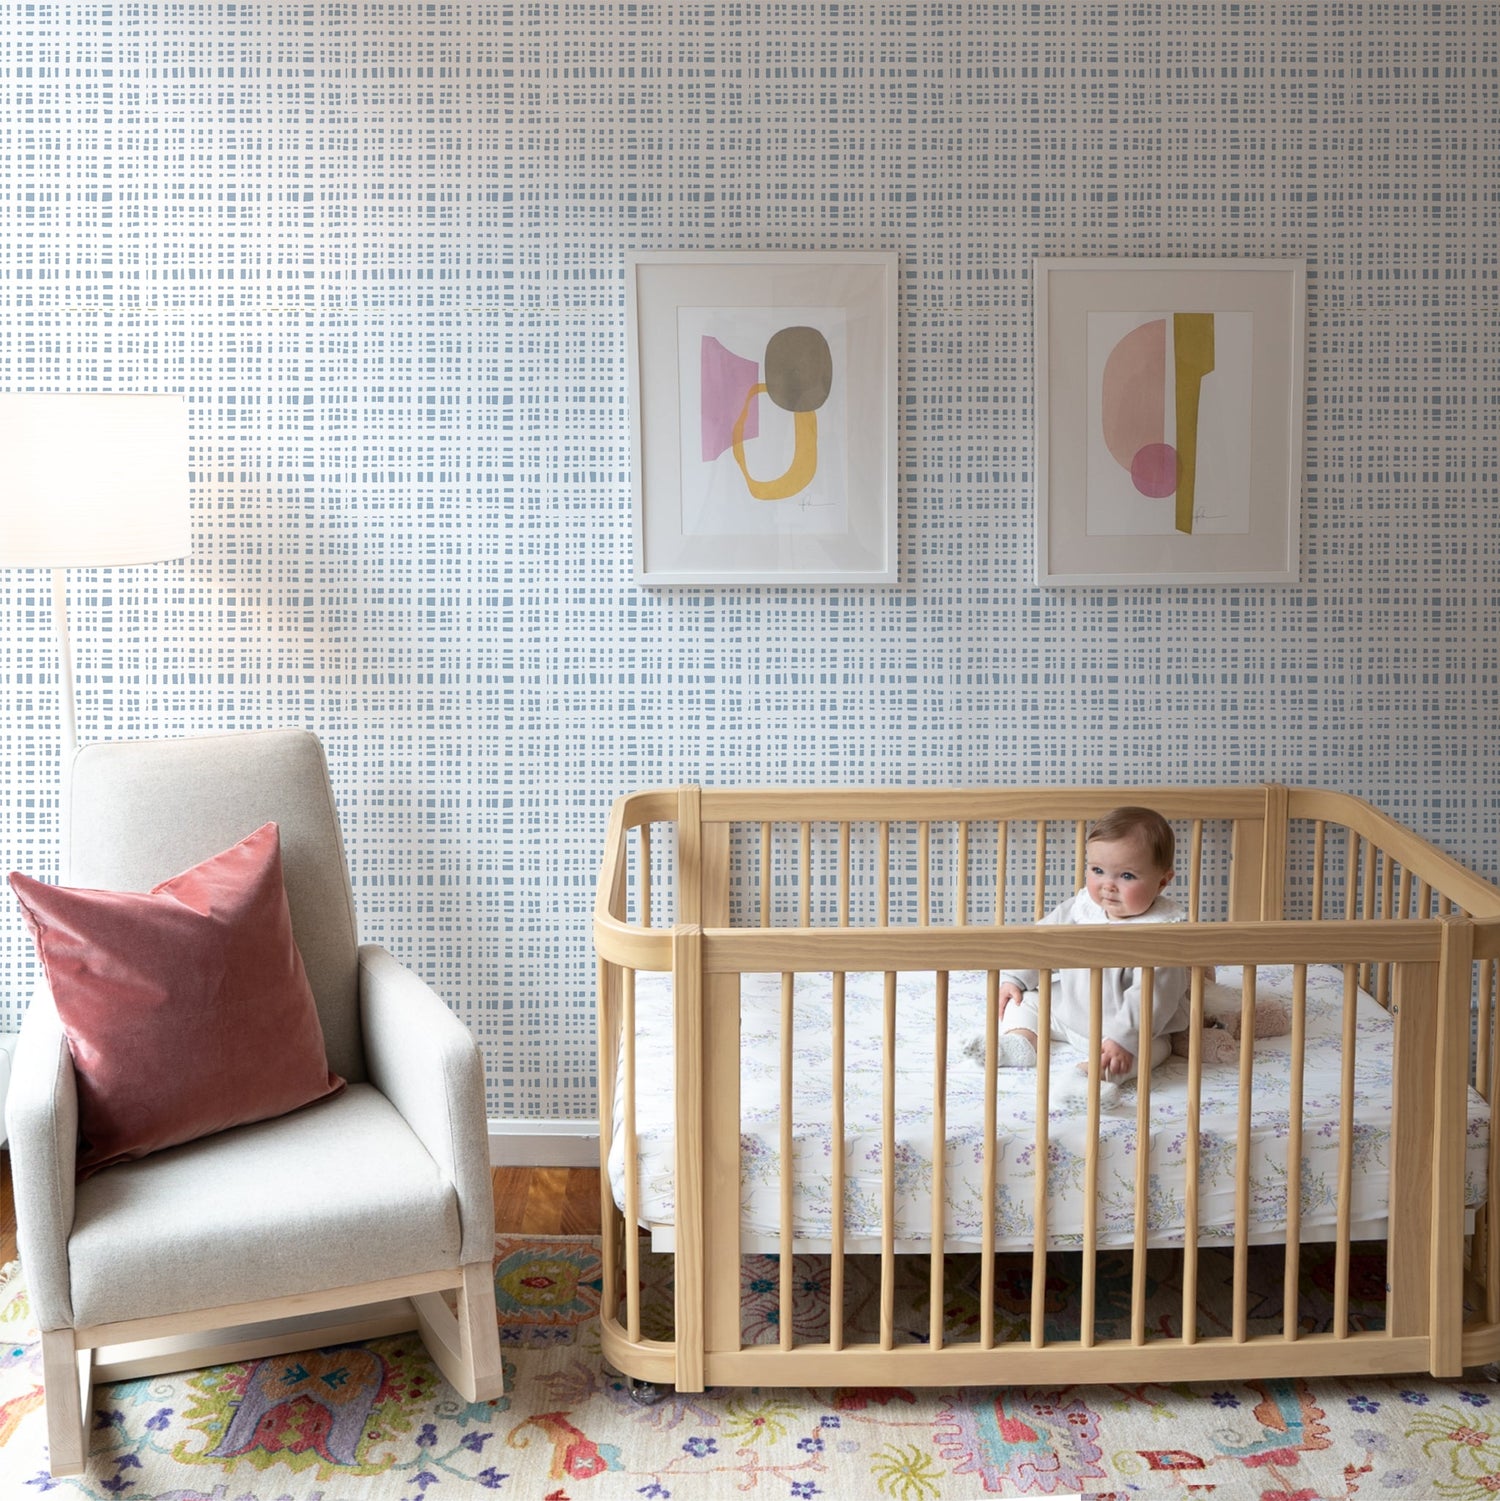 Nursery room styled with Sky Blue Gingham Printed Wallpaper next to wooden crib with baby on it by cream sofa chair with Coral Velvet Pillow on top